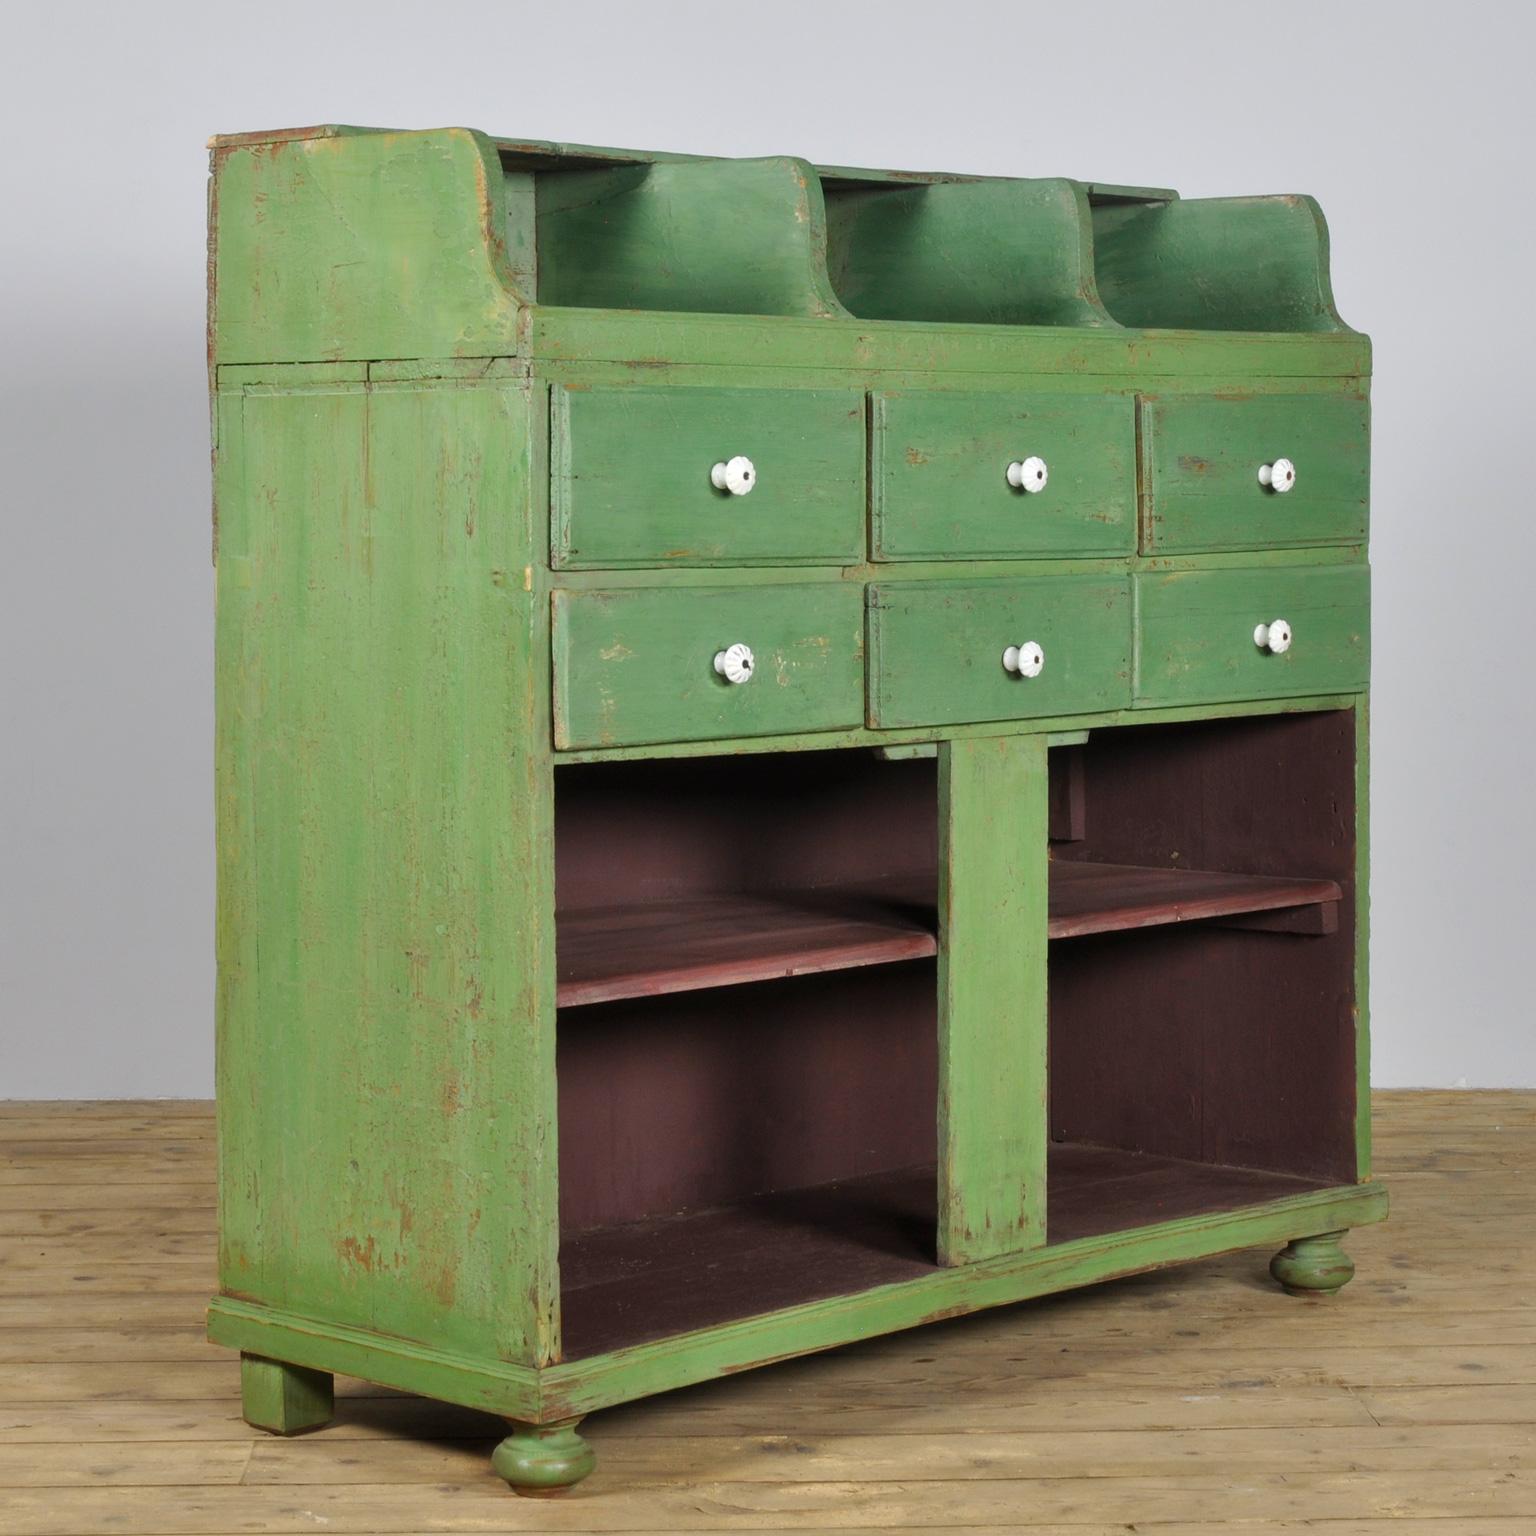 Vintage shop fitting from the 1930s. Made of pine. With 6 drawers.